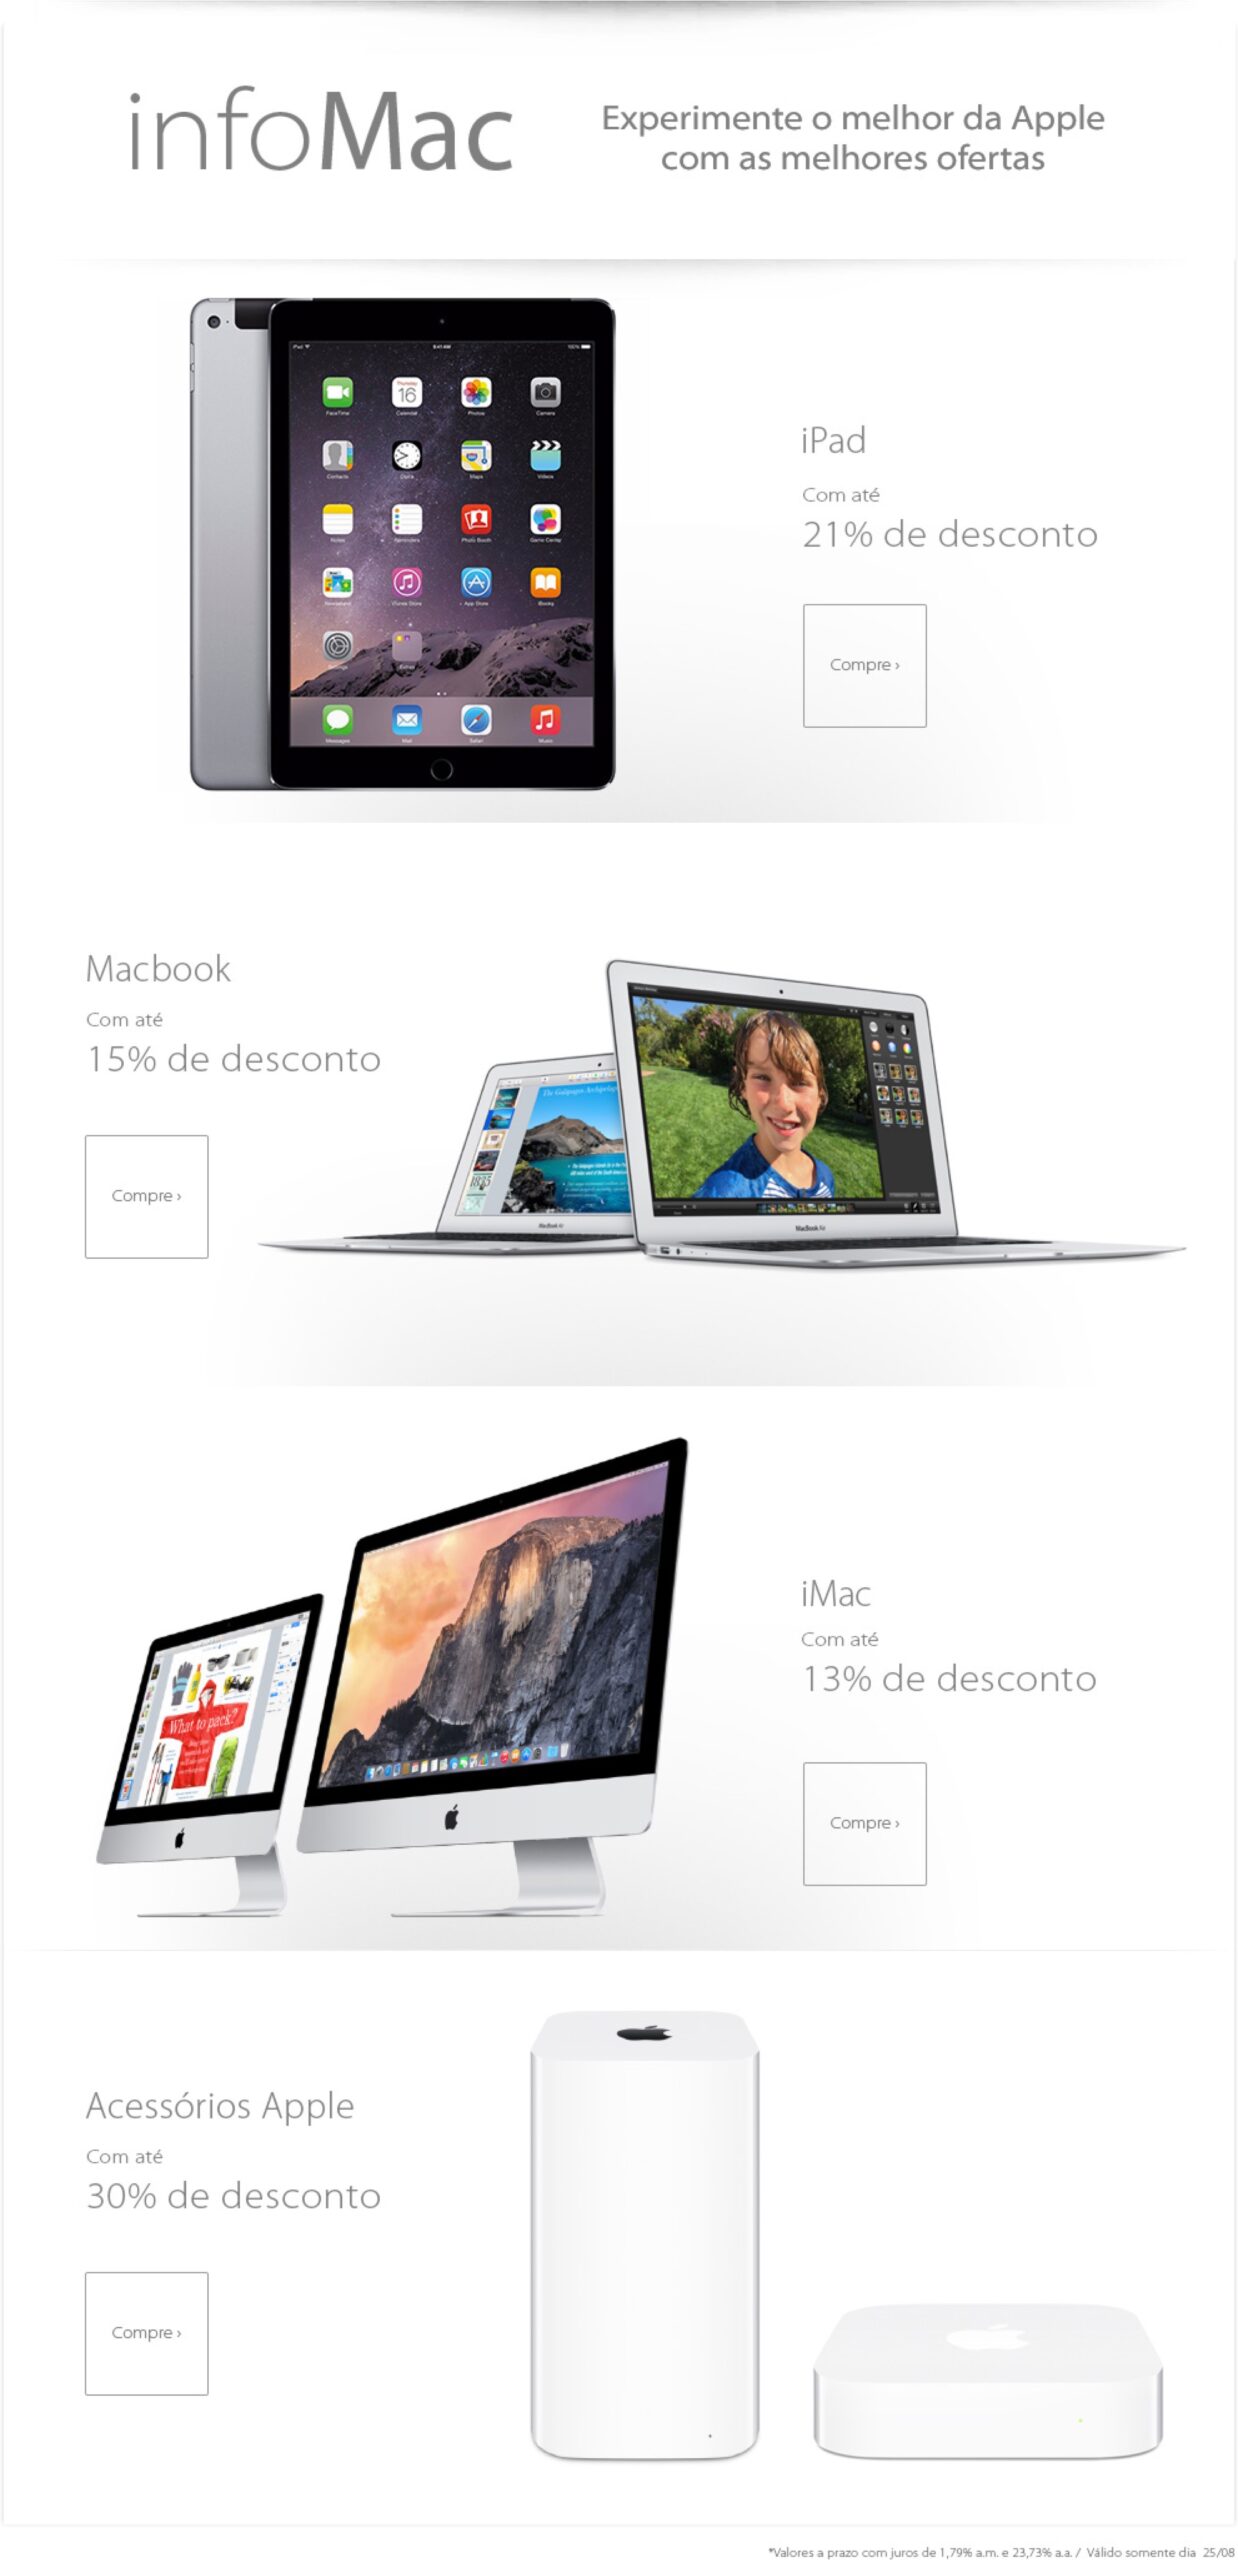 ★ Today is infoMac day at the Fast Shop; buy Apple products at a discount!